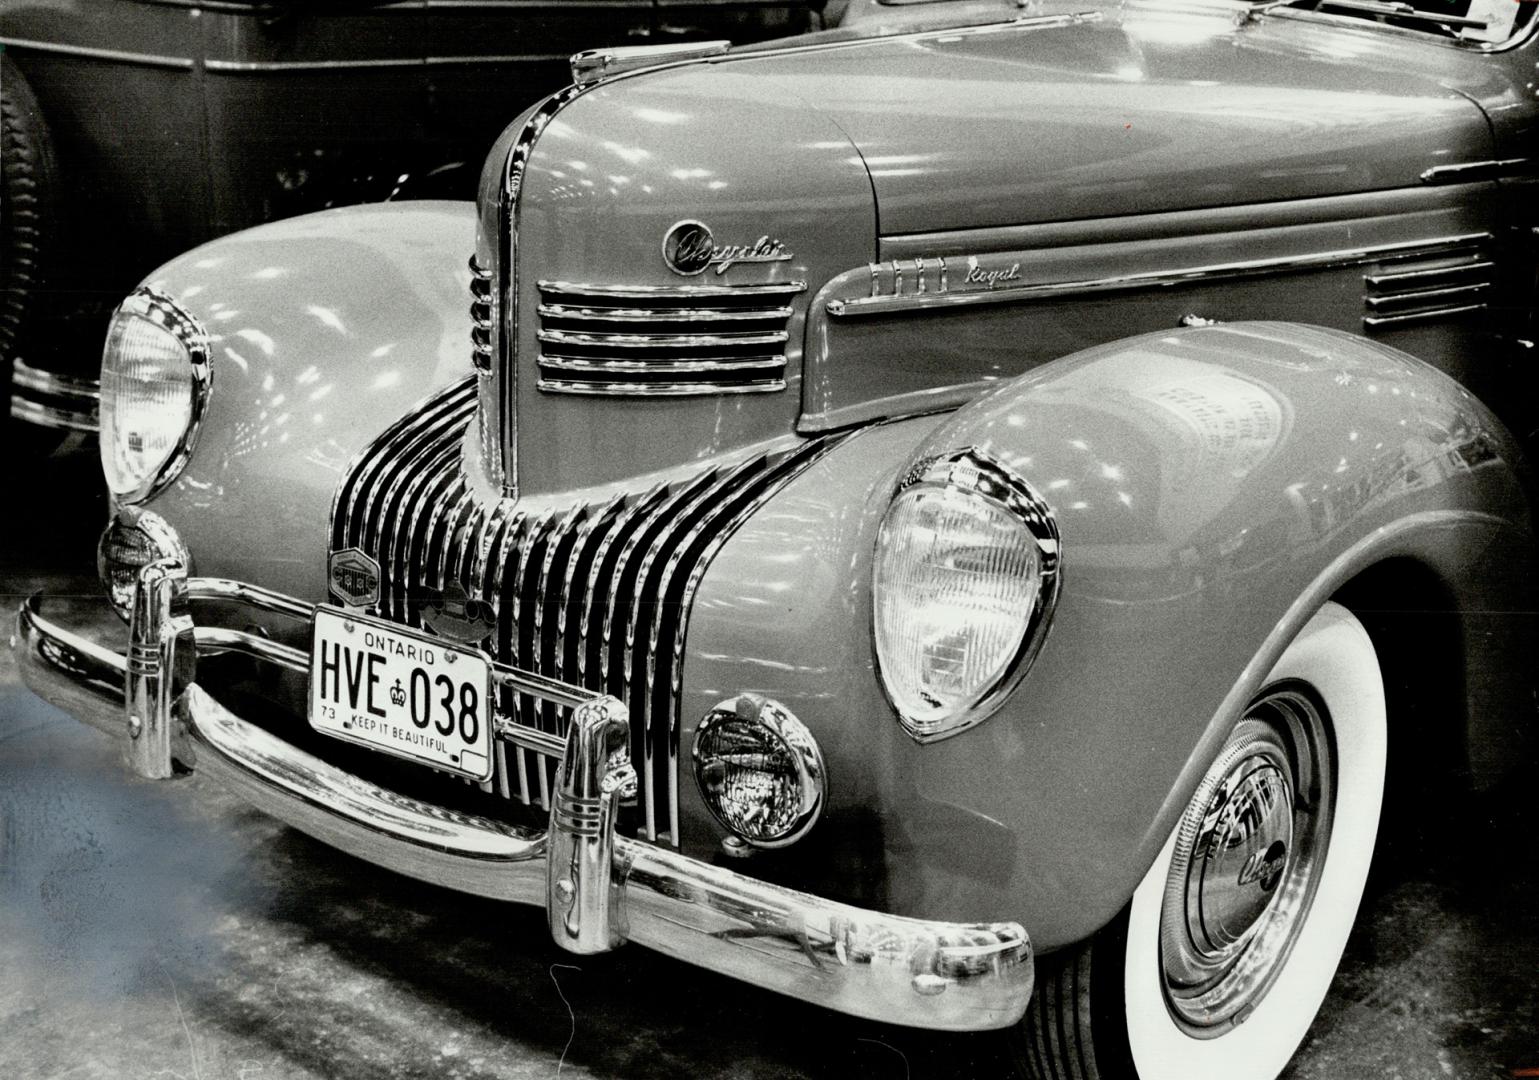 Down Memory Lane, this was just about last of fully chromed Chrysler front ends before civilian car production stopped during World War II. One of the(...)